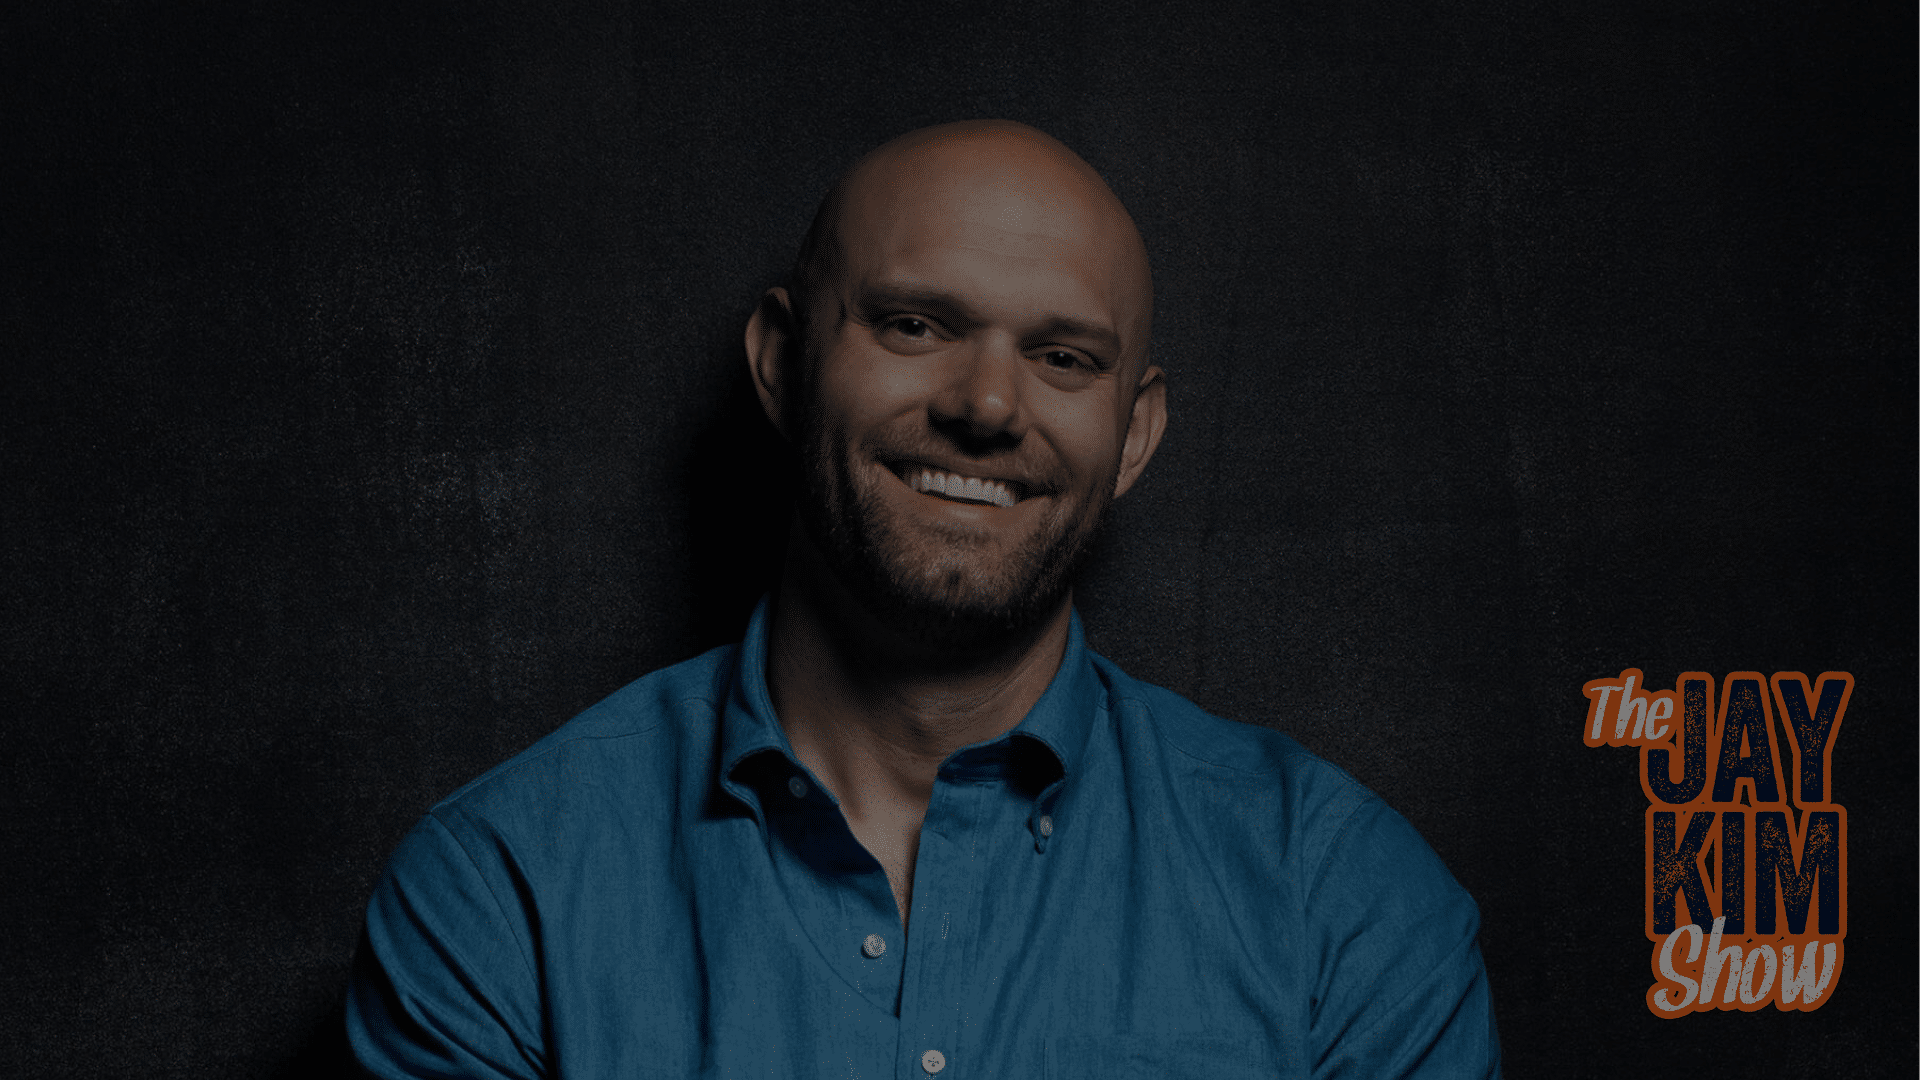 124: James Clear, NYT bestselling author of Atomic Habits: An Easy & Proven Way to Build Good Habits & Break Bad Ones